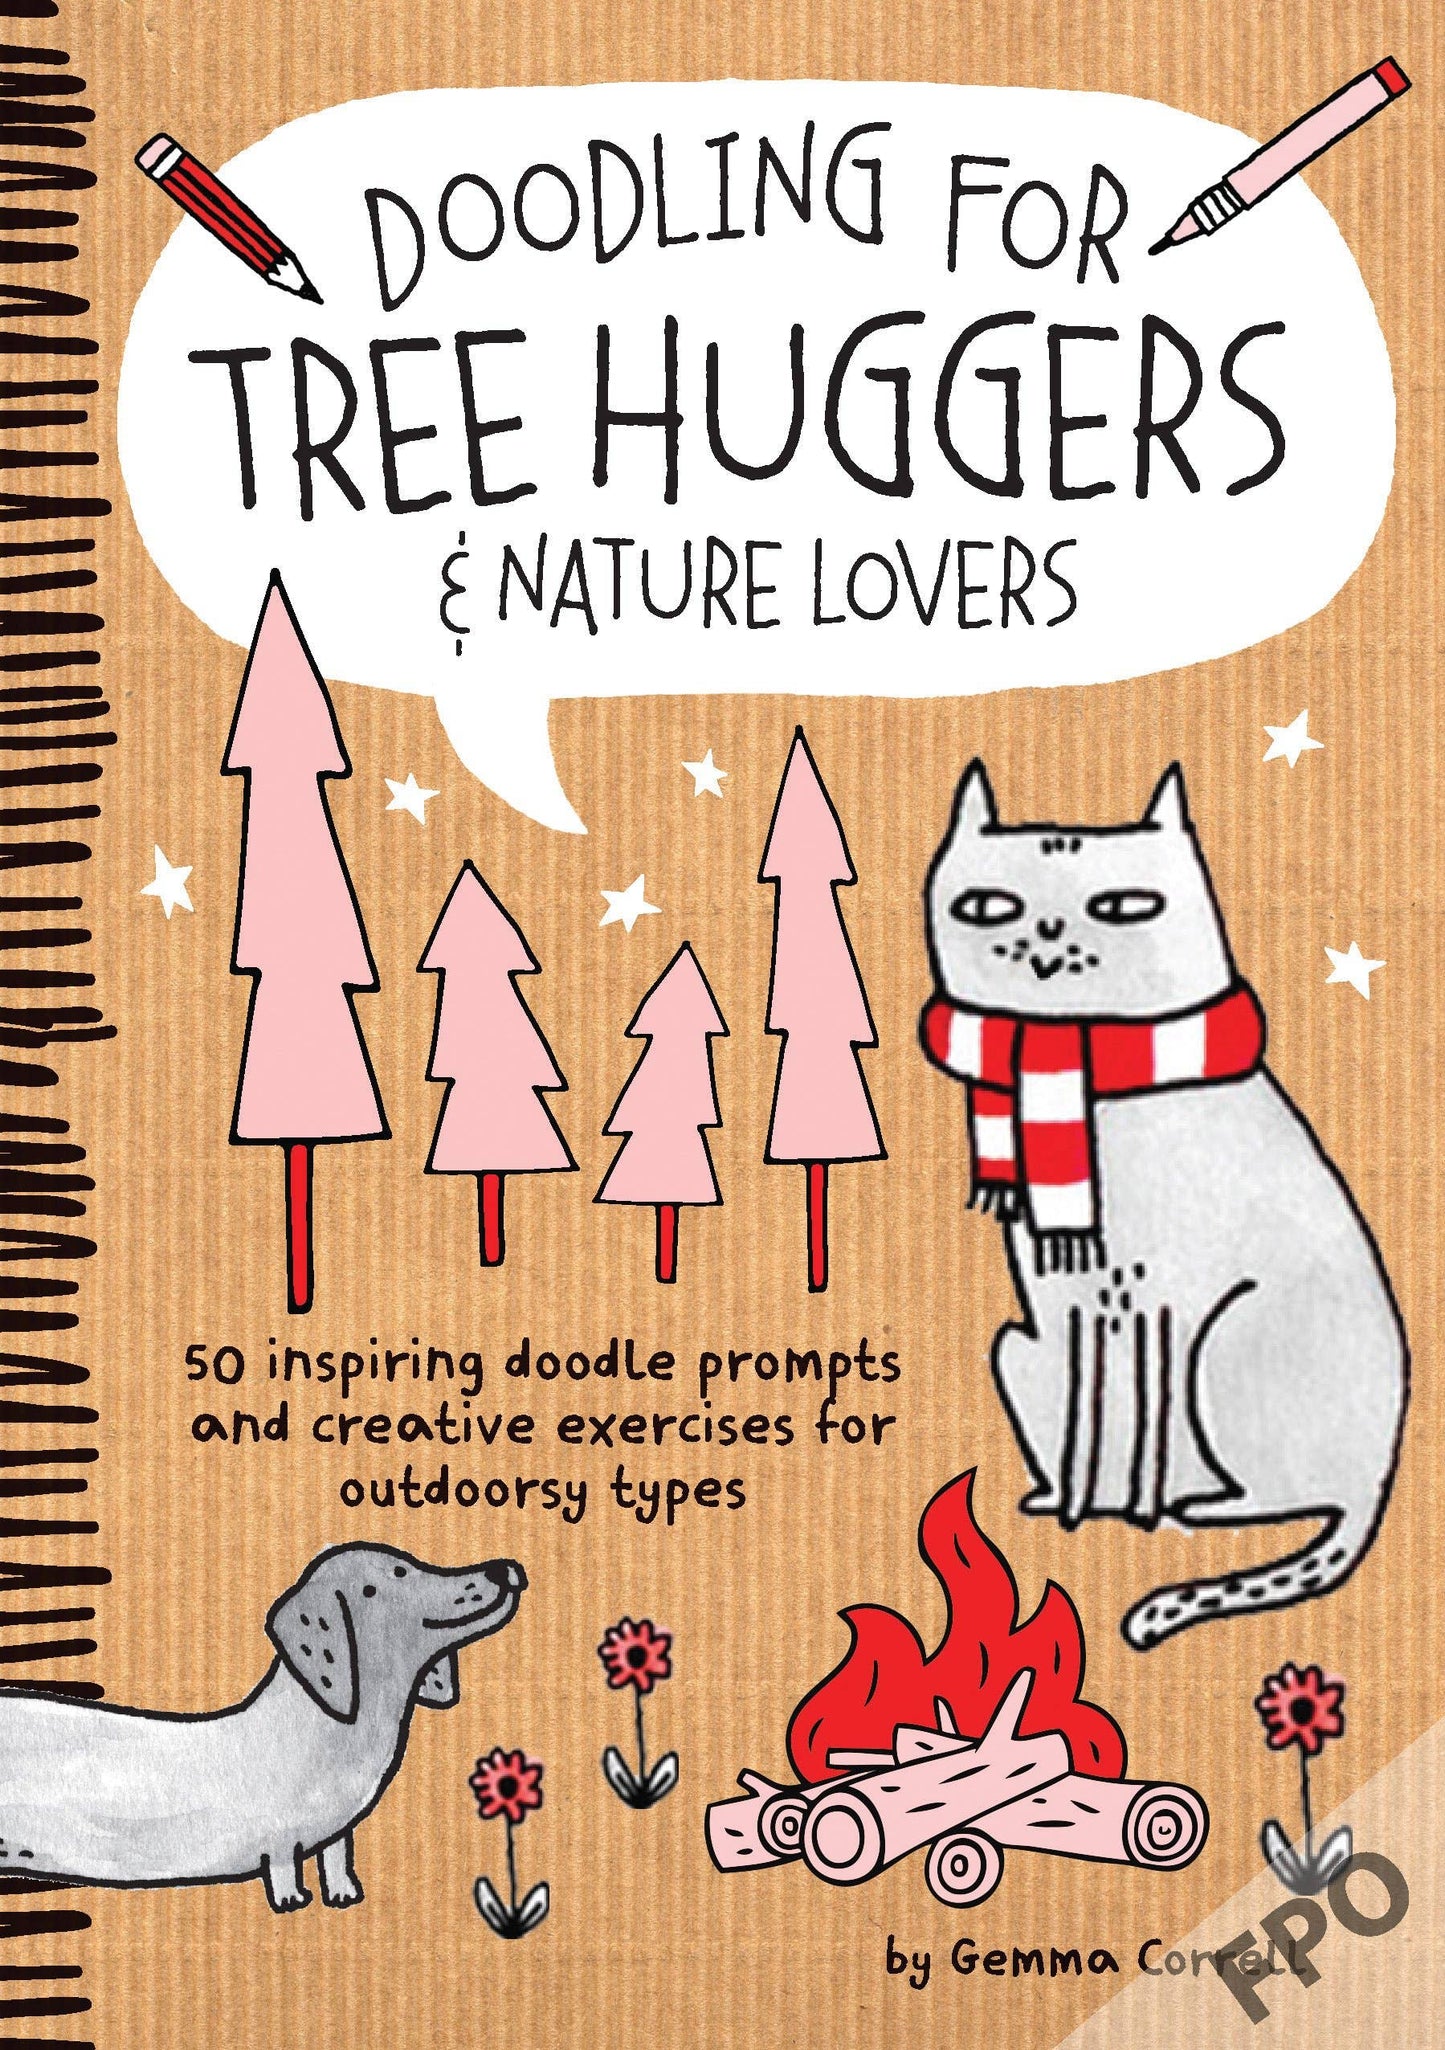 Doodling for Tree Huggers & Nature Lovers